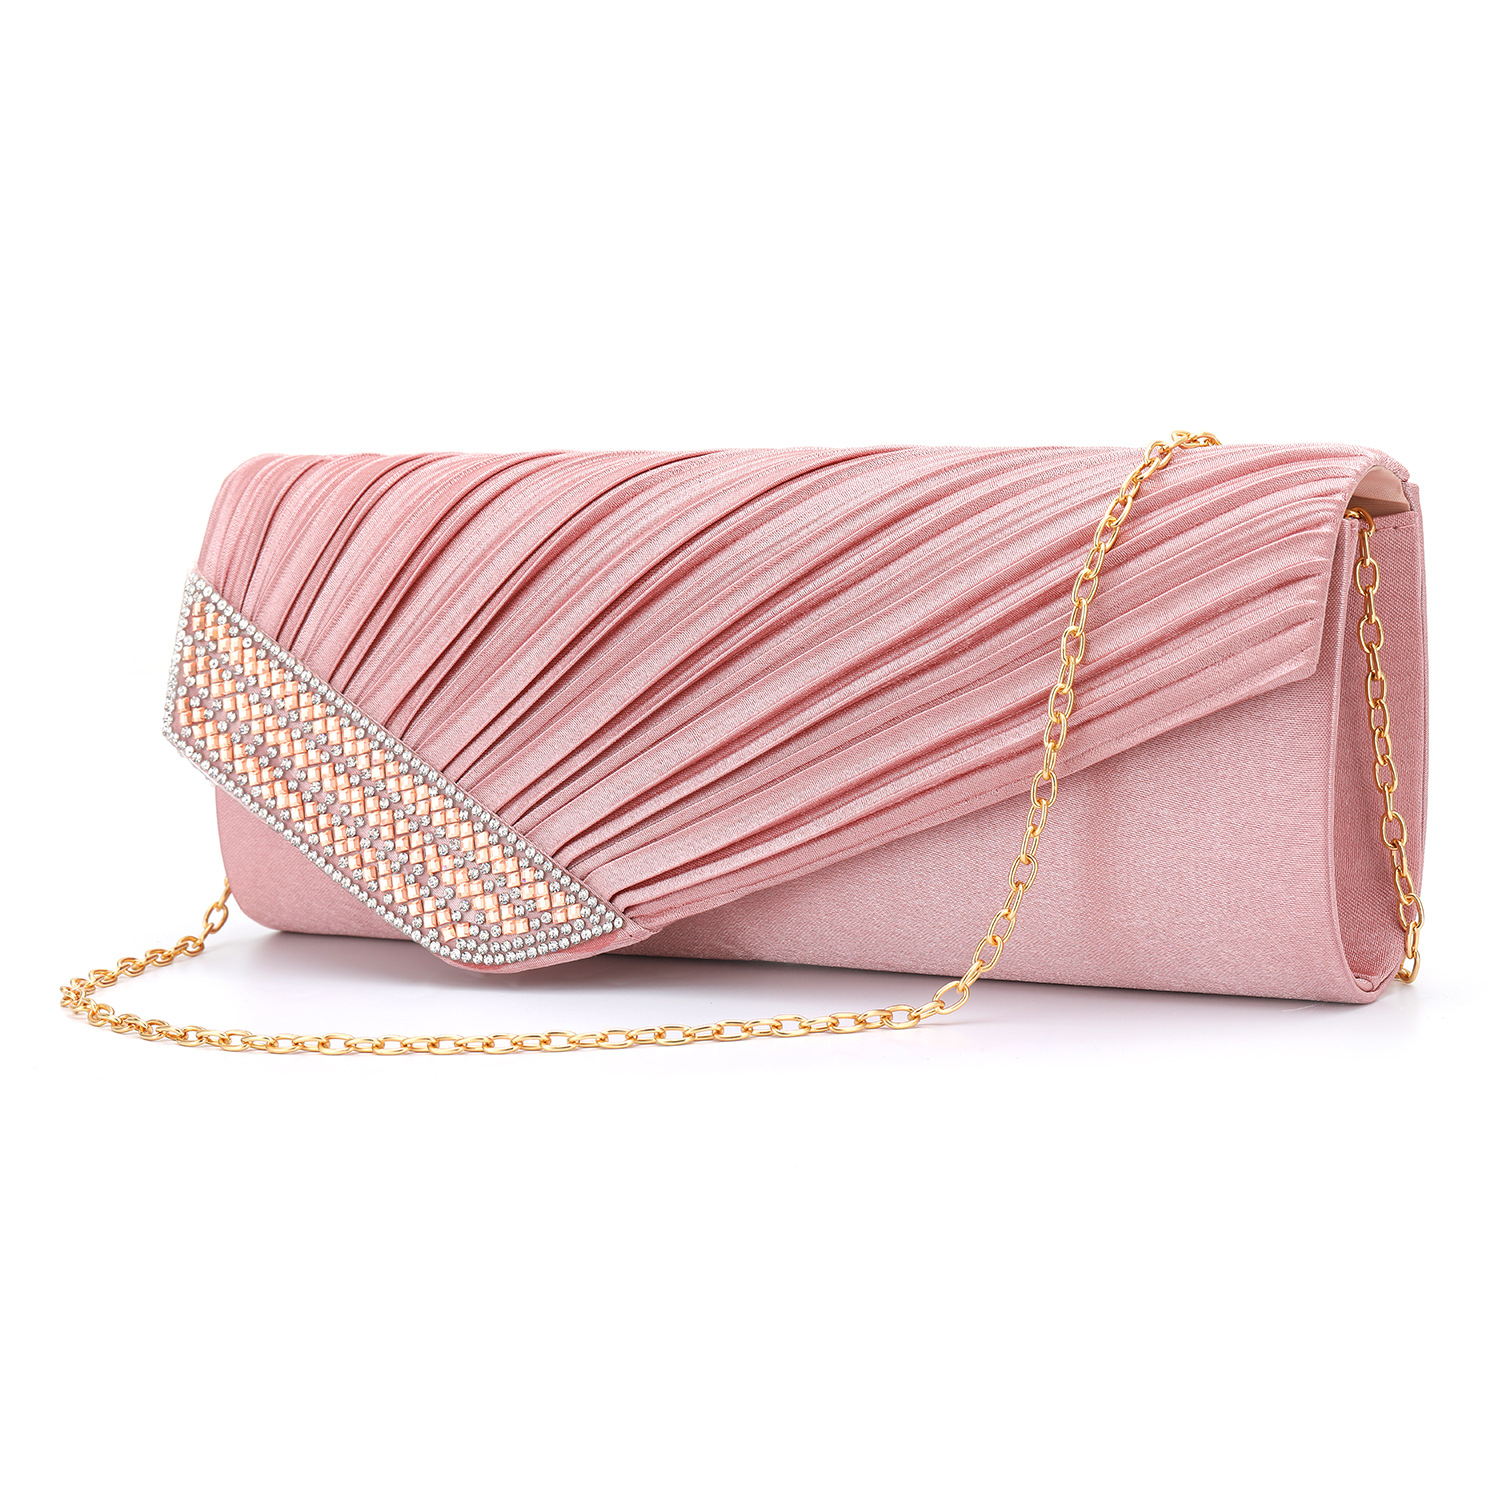 A new style pleated ribbon Diamond Satin dinner gift bag issued on behalf of Amazon clutch bag1210